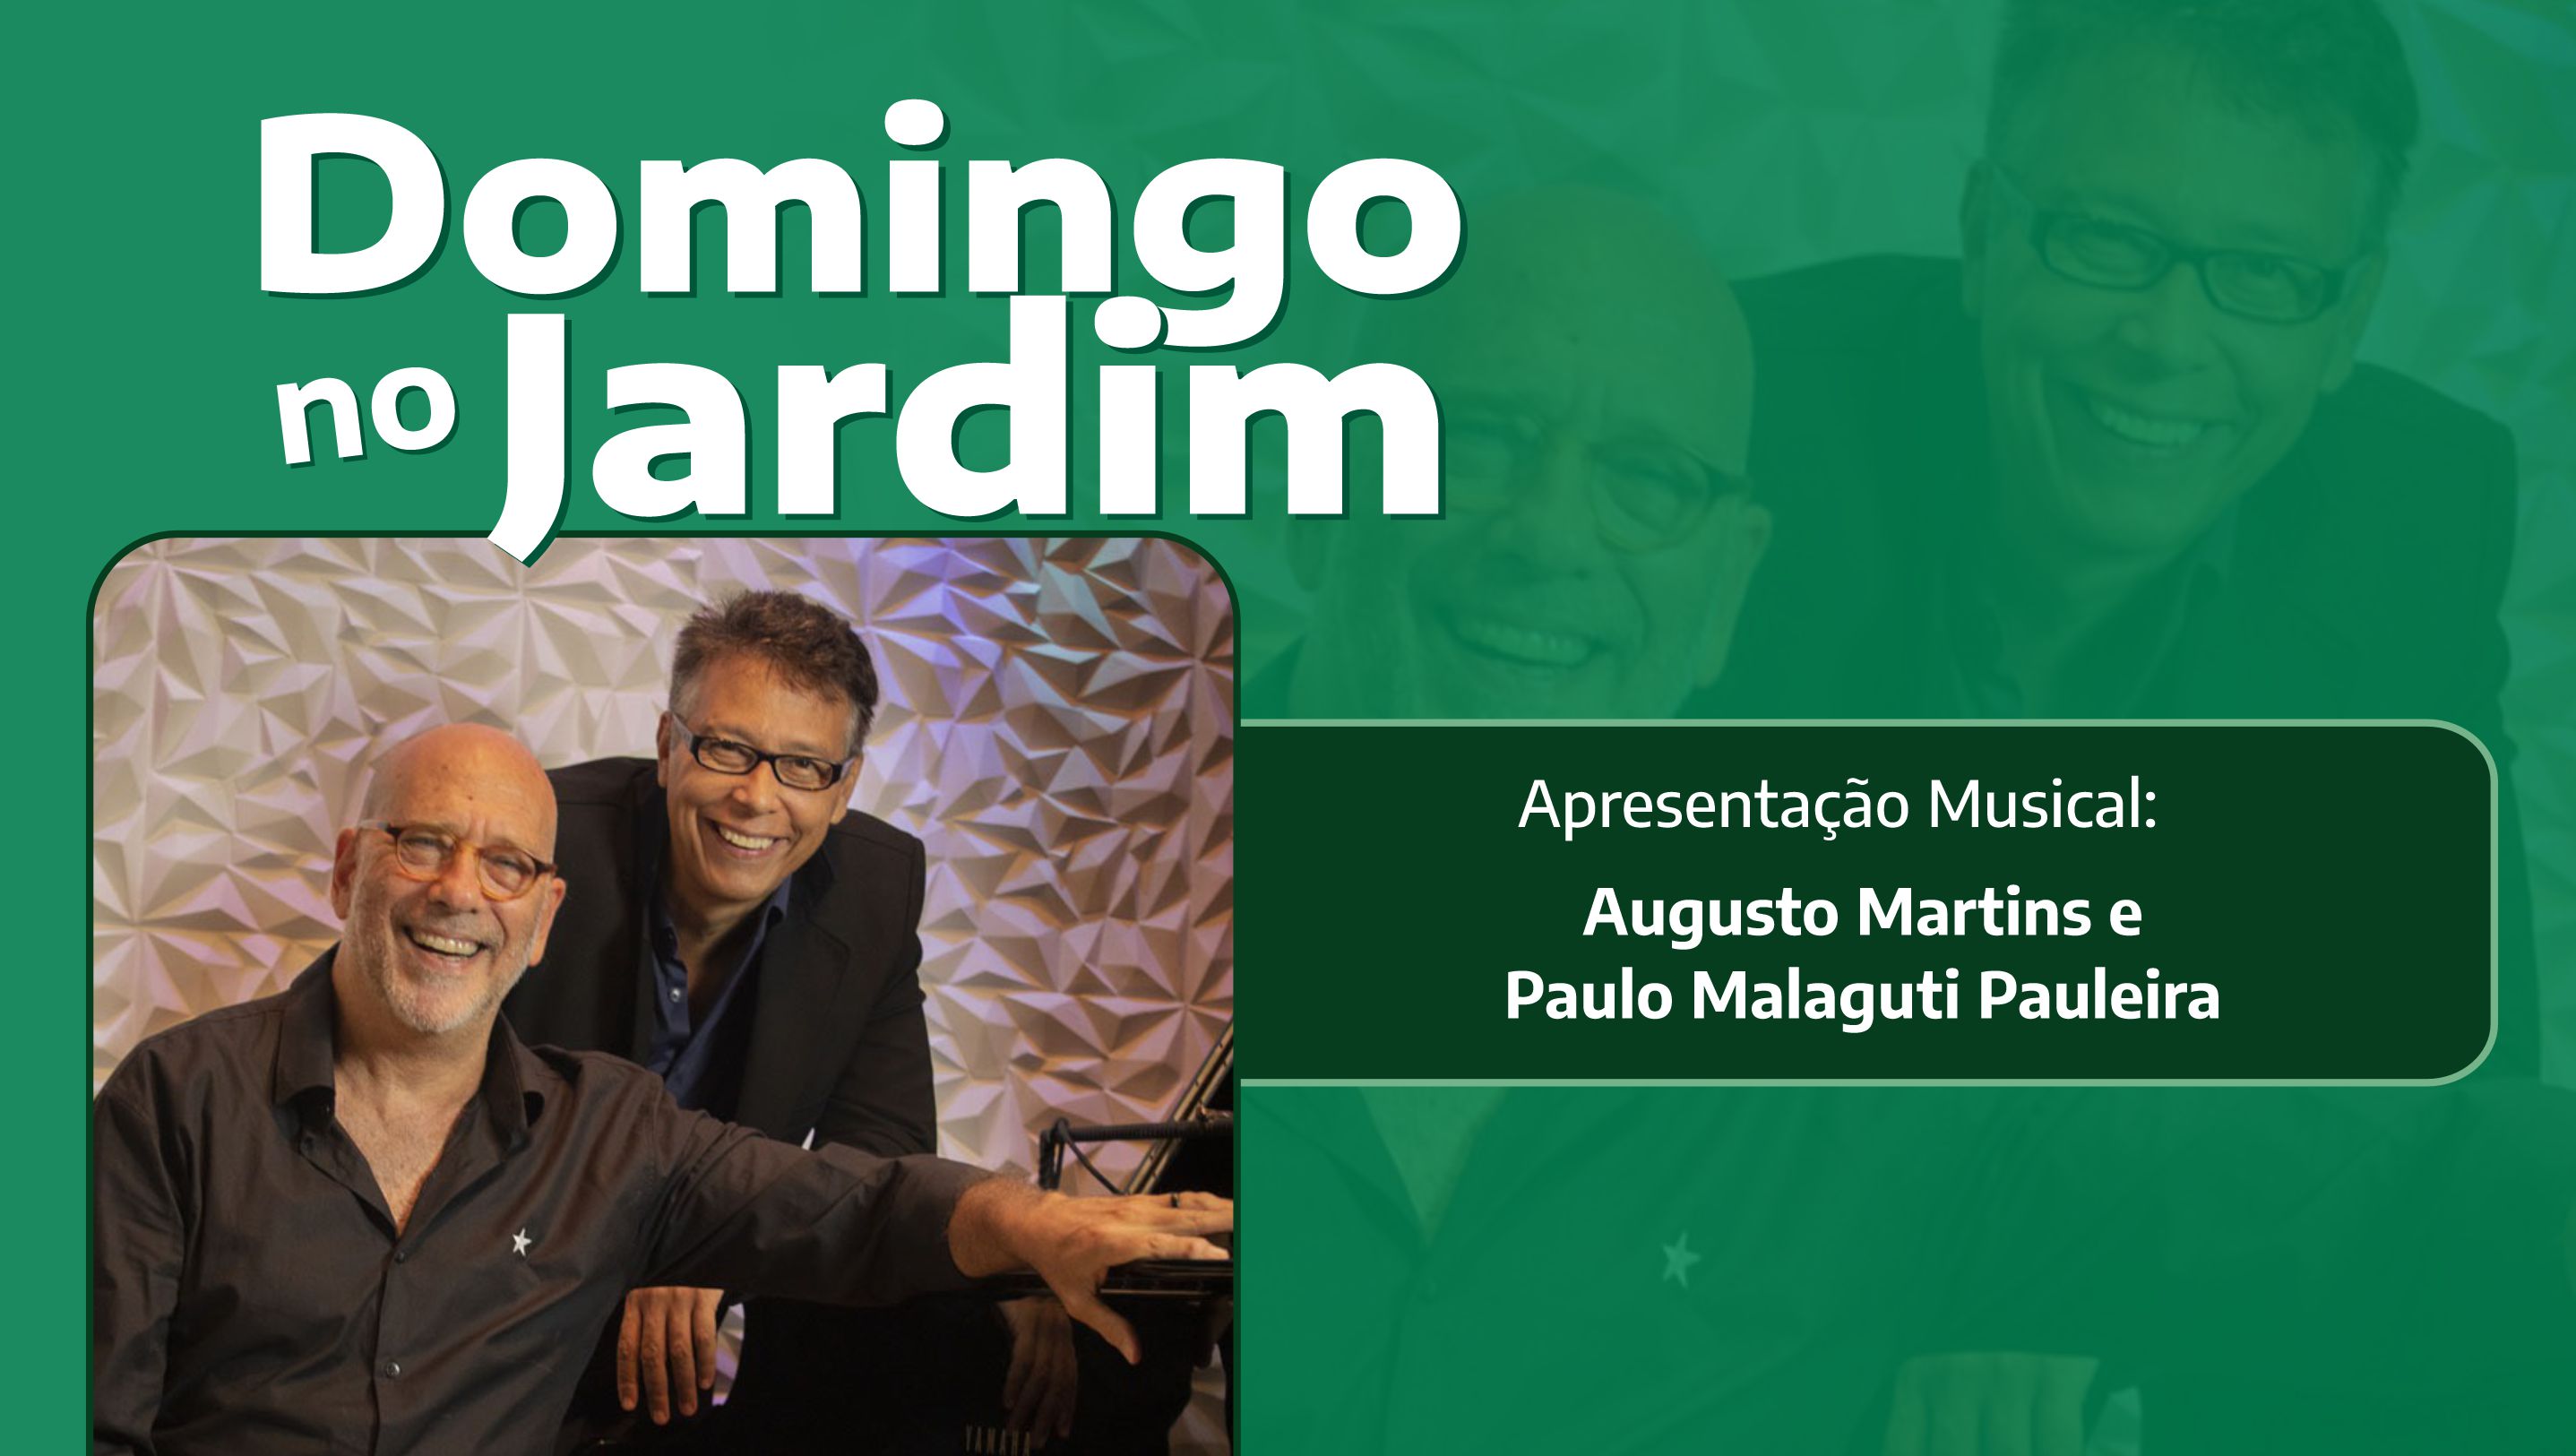 Sunday in the Garden: The music of Tom and Aldir in the piano and voice of Paulo Malaguti Pauleira and Augusto Martins